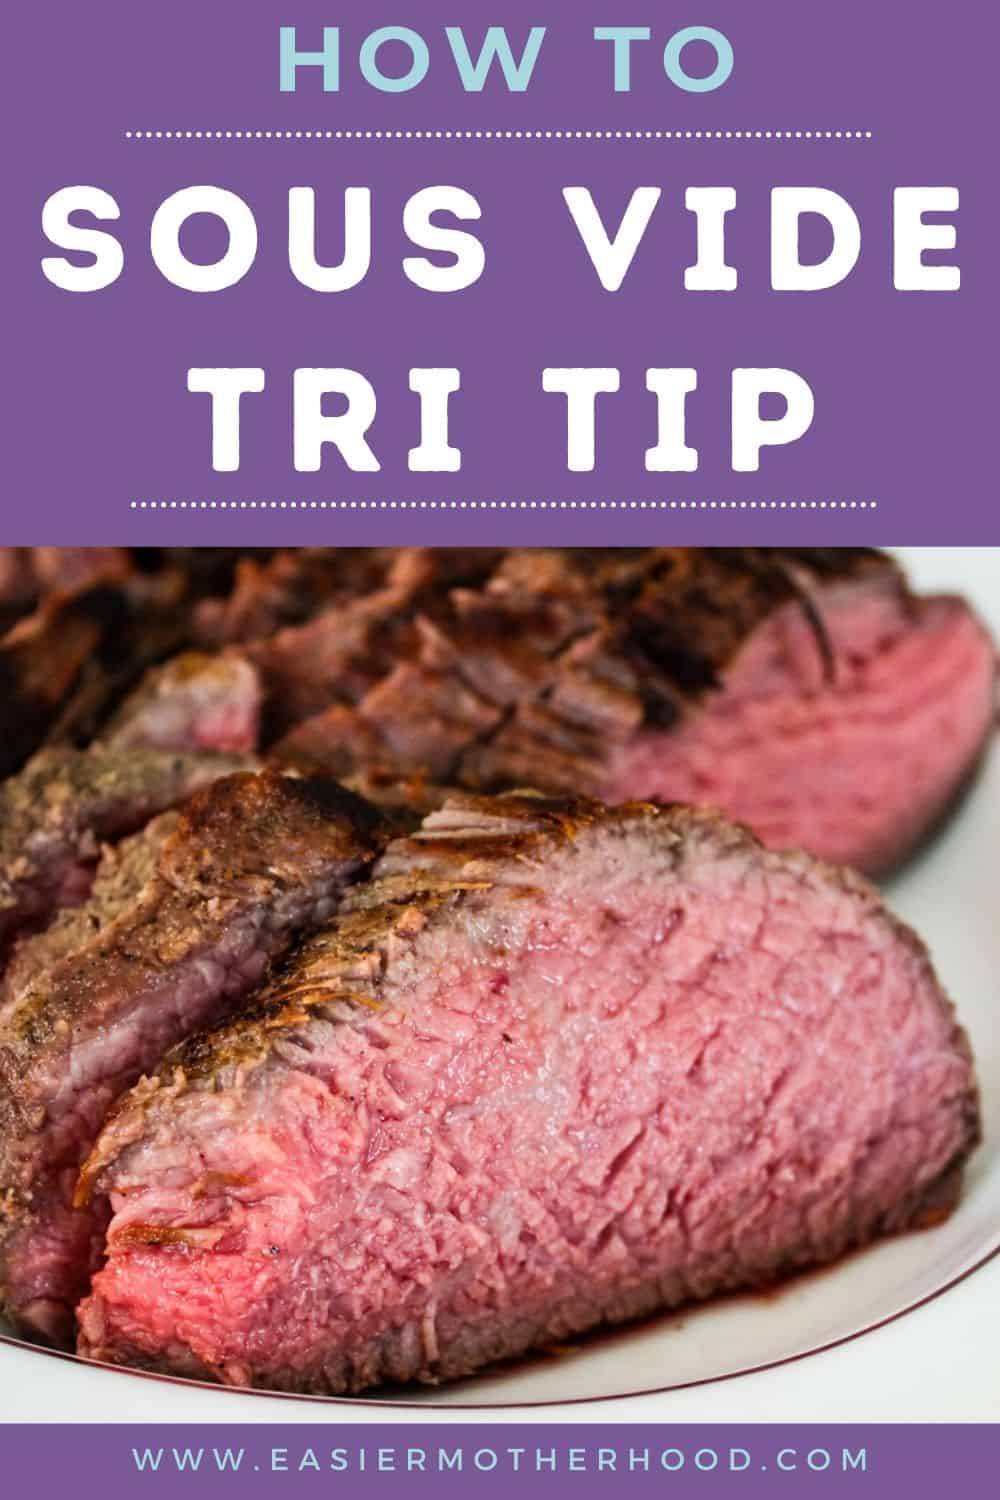 Sliced tri tip on a white plate with text above that reads "how to sous vide tri tip"